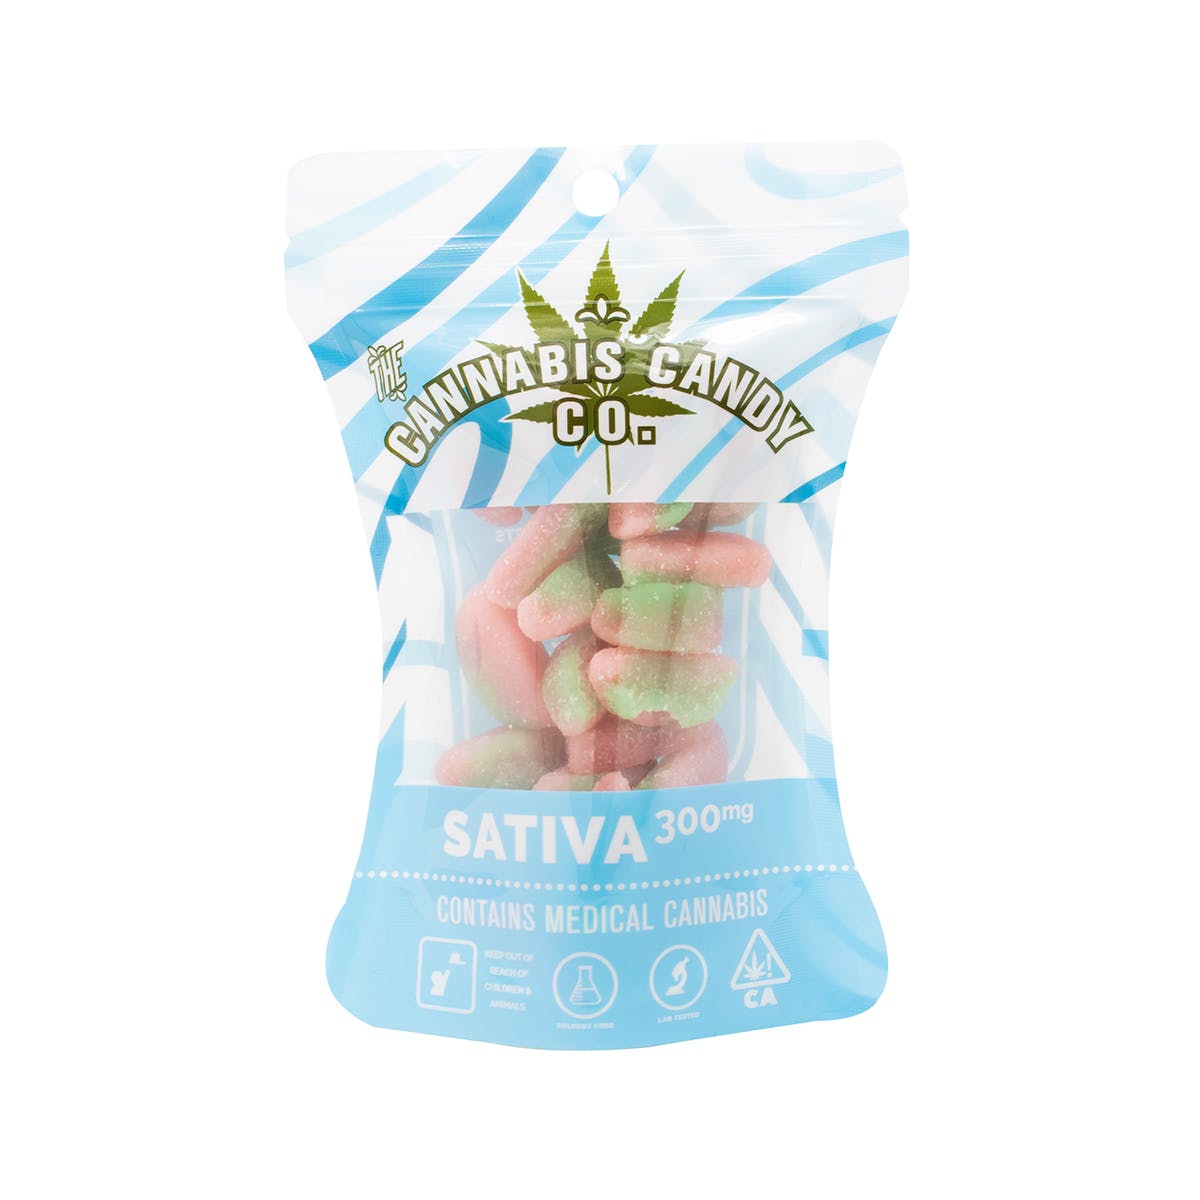 edible-the-cannabis-candy-co-watermelon-wedges-300mg-sativa